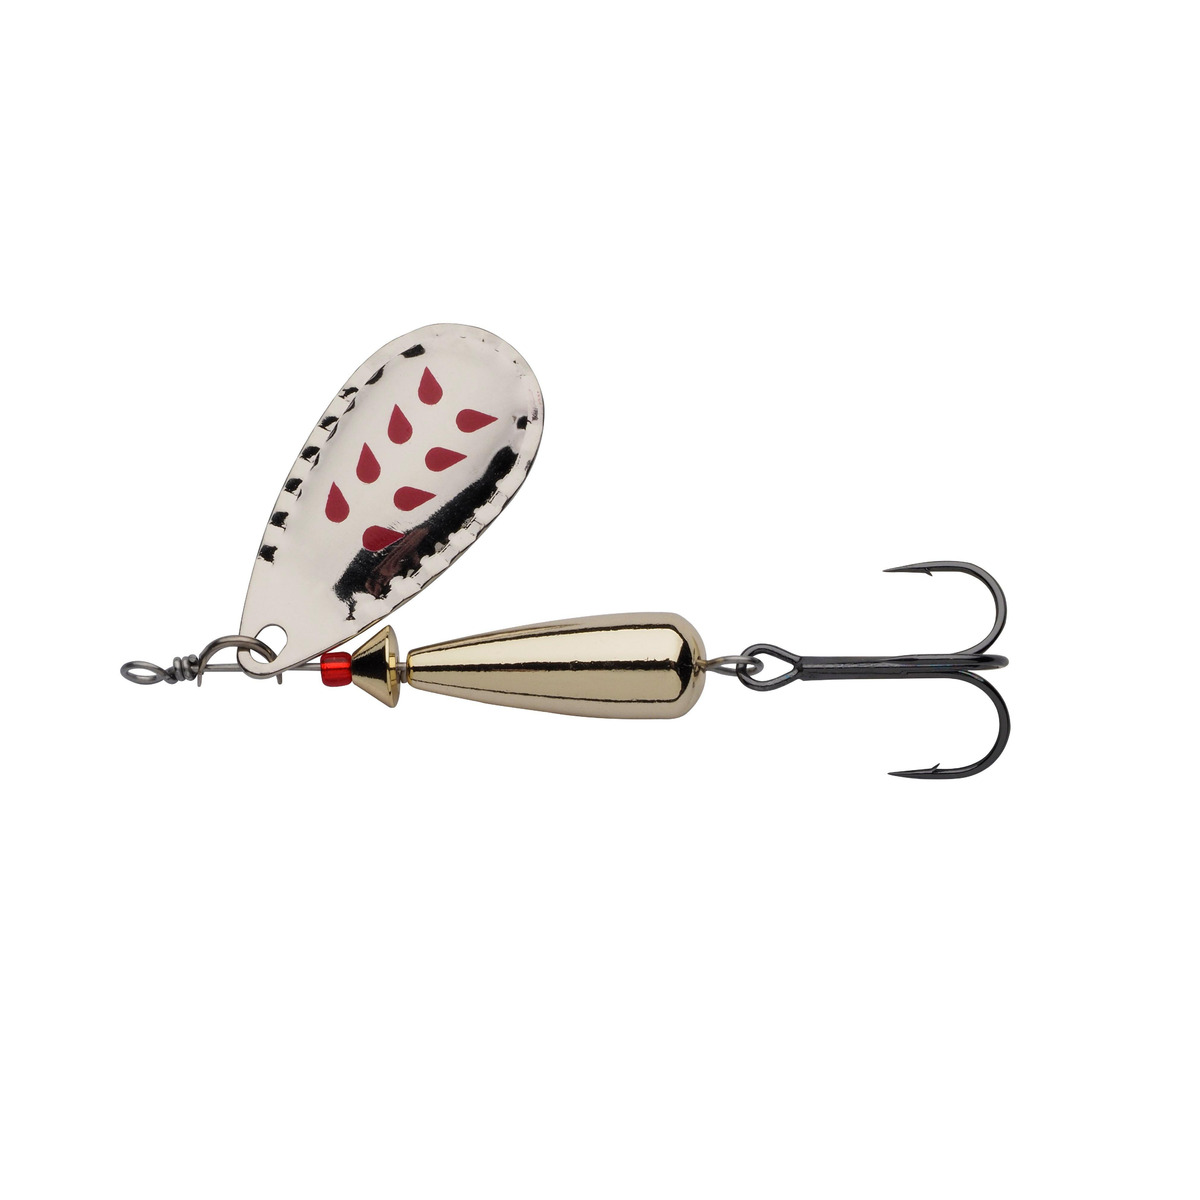 Abu Garcia Droppen Spinners 4 G - Silver-Red Marks - 40 mm